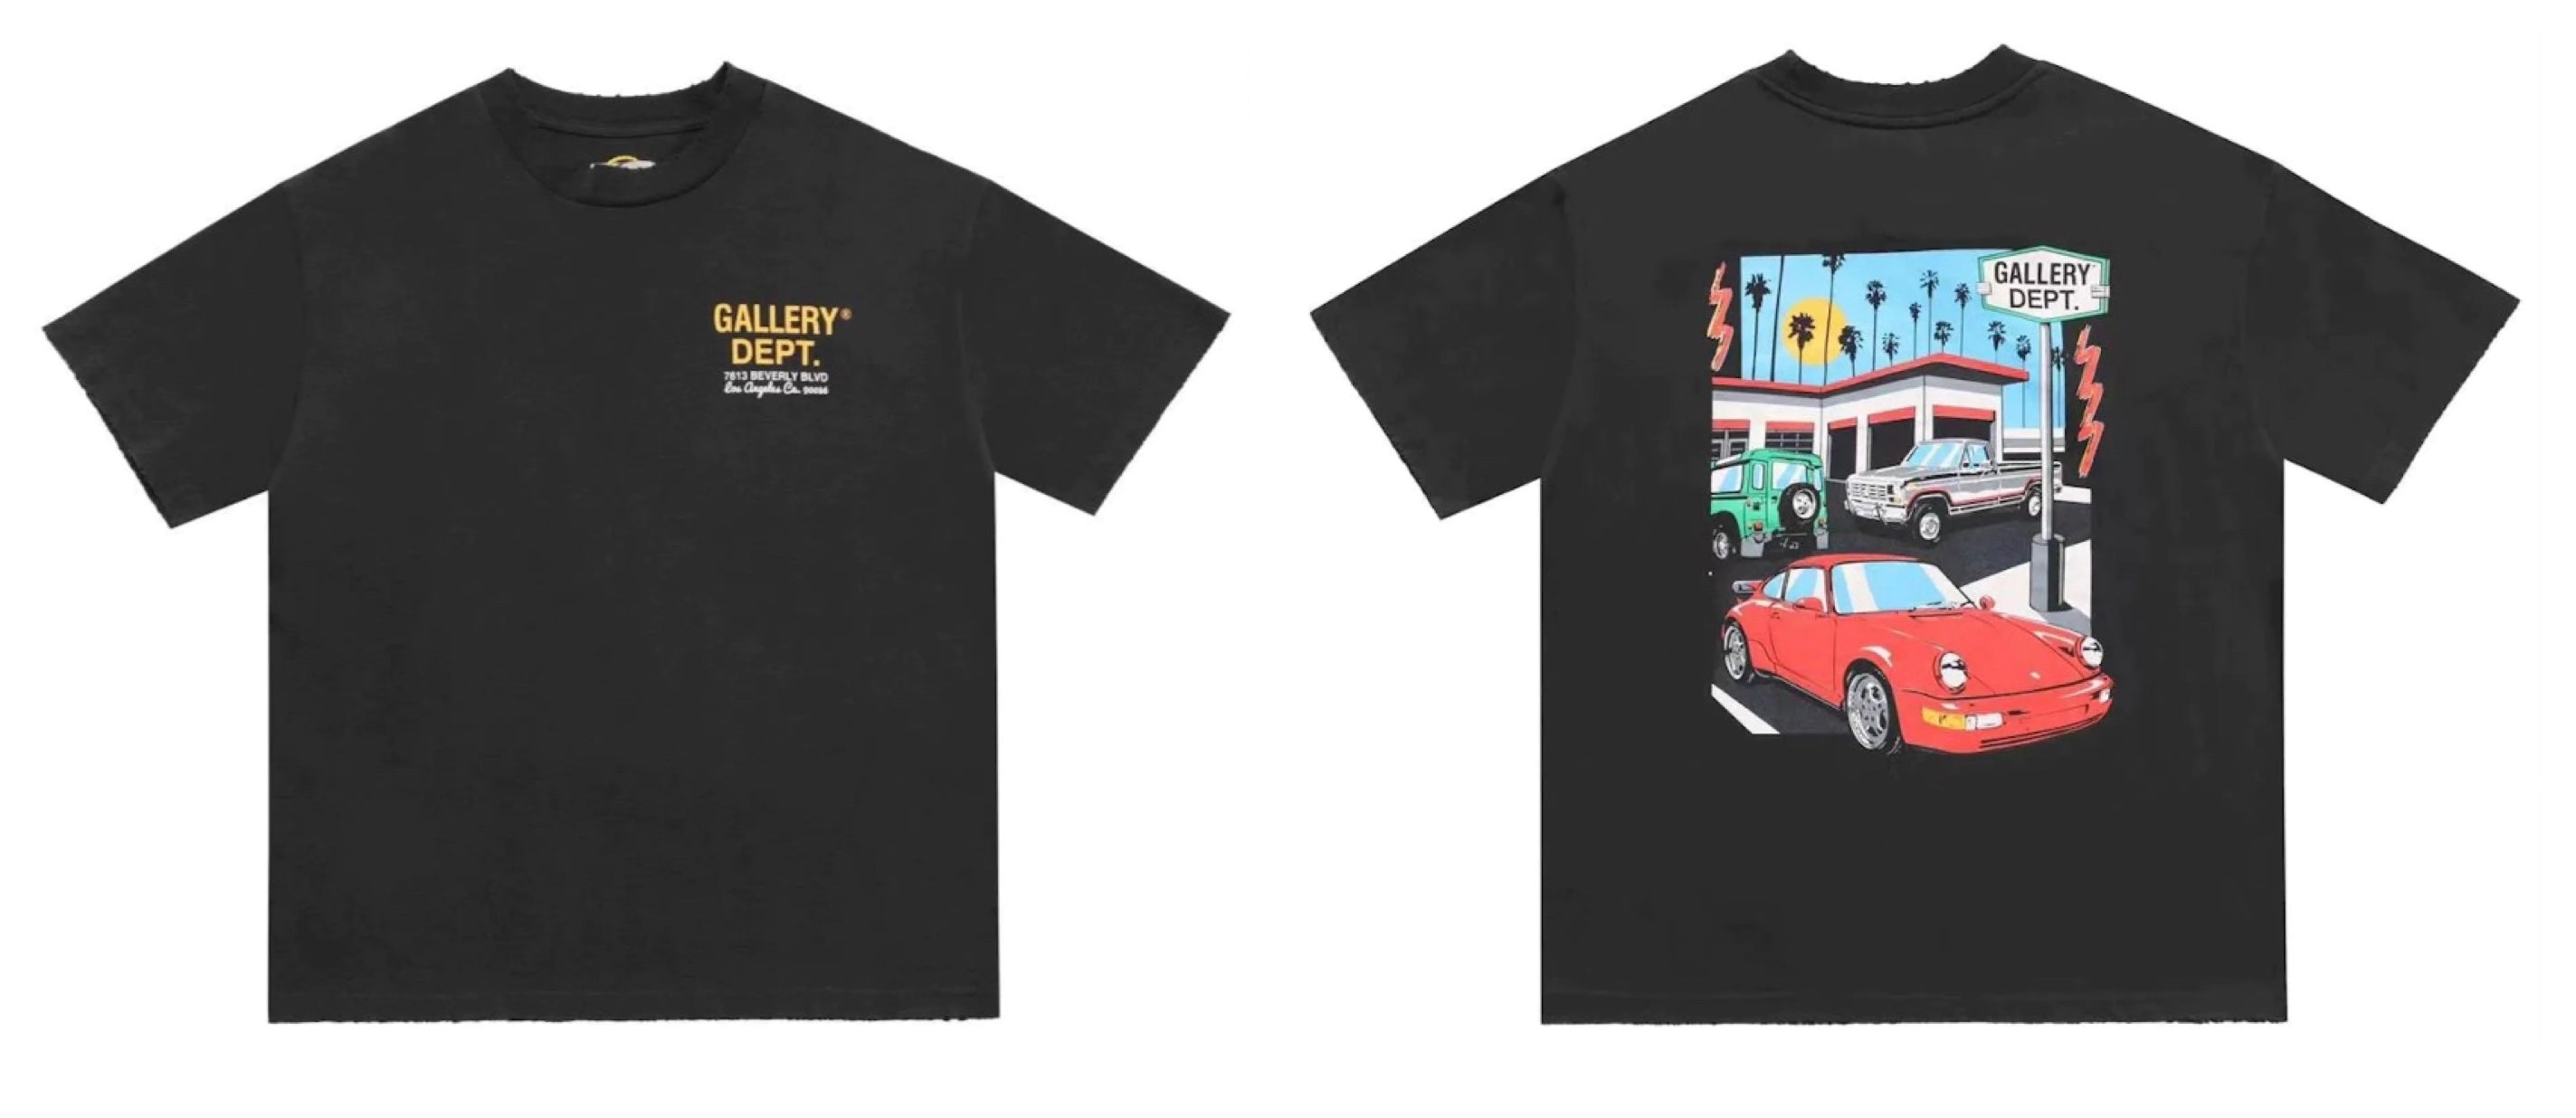 GALLERY DEPT  Drive Thru Boxy Fit Tee